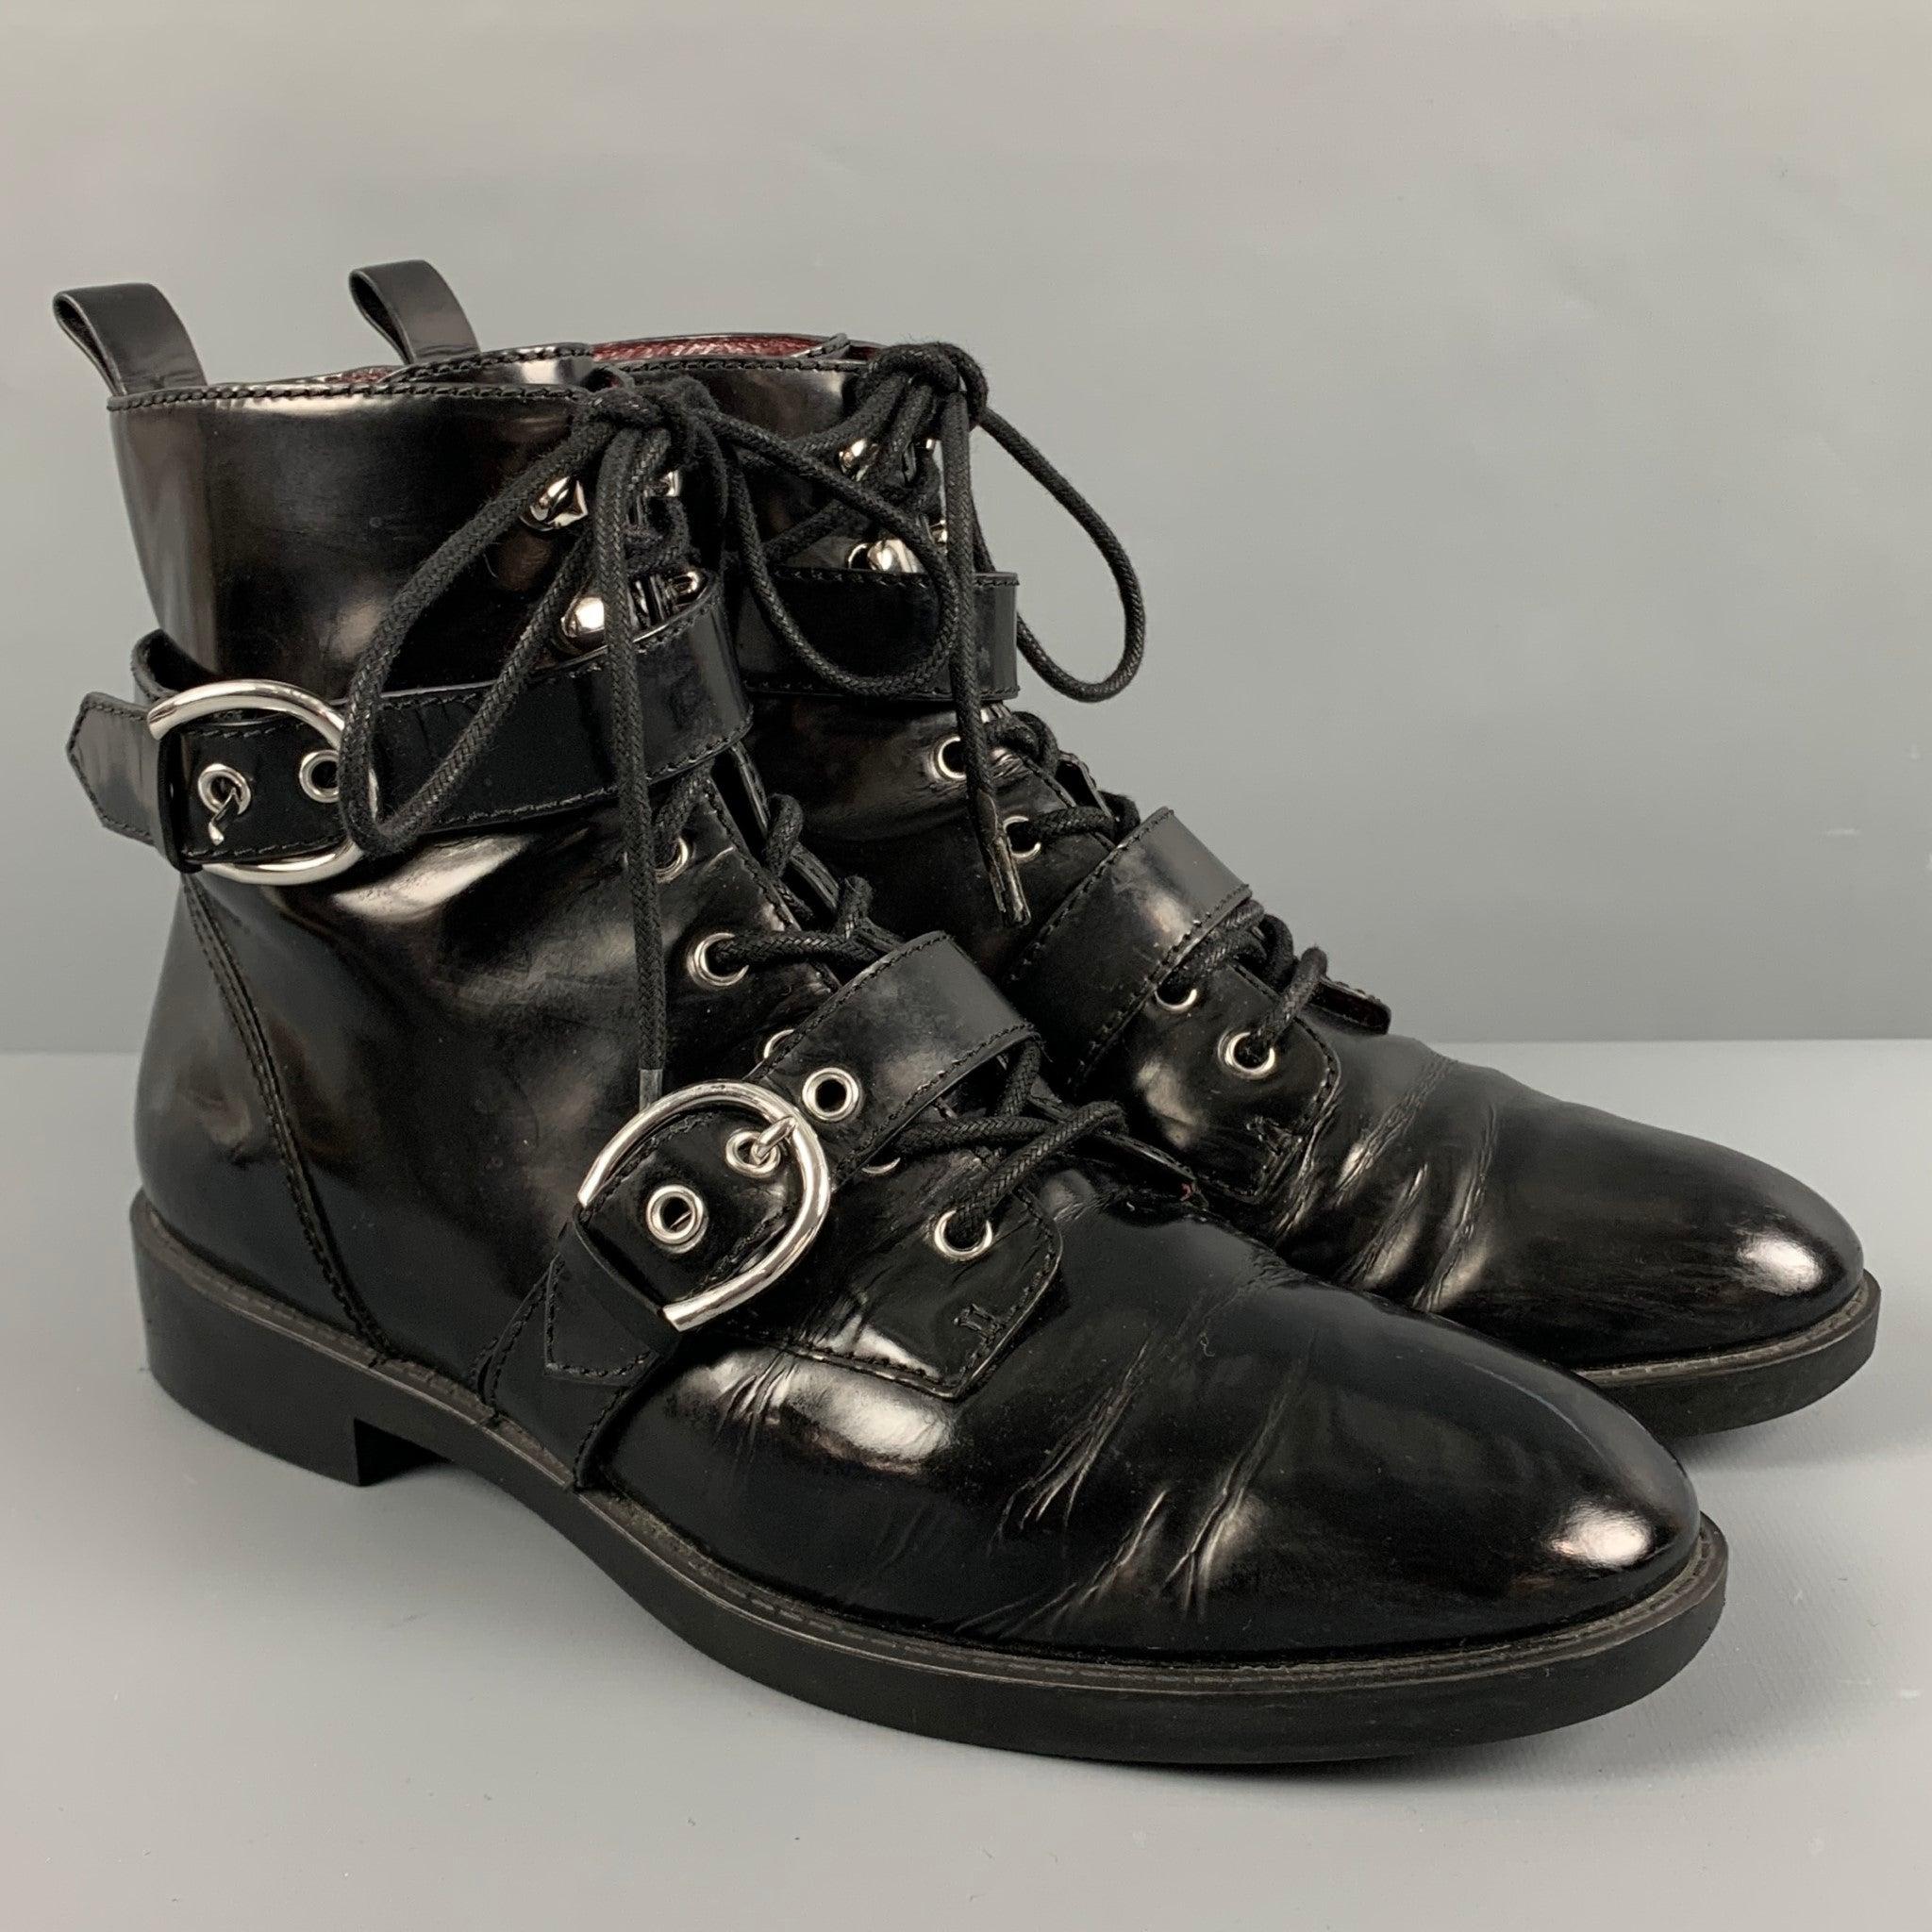 MARC JACOBS boots
in a black patent leather featuring a rubber sole, silver tone double buckles, and a side zipper closure.Very Good Pre-Owned Condition. Moderate signs of wear. 

Marked:   39 

Measurements: 
  Length: 10.5 inches Width: 3.5 inches